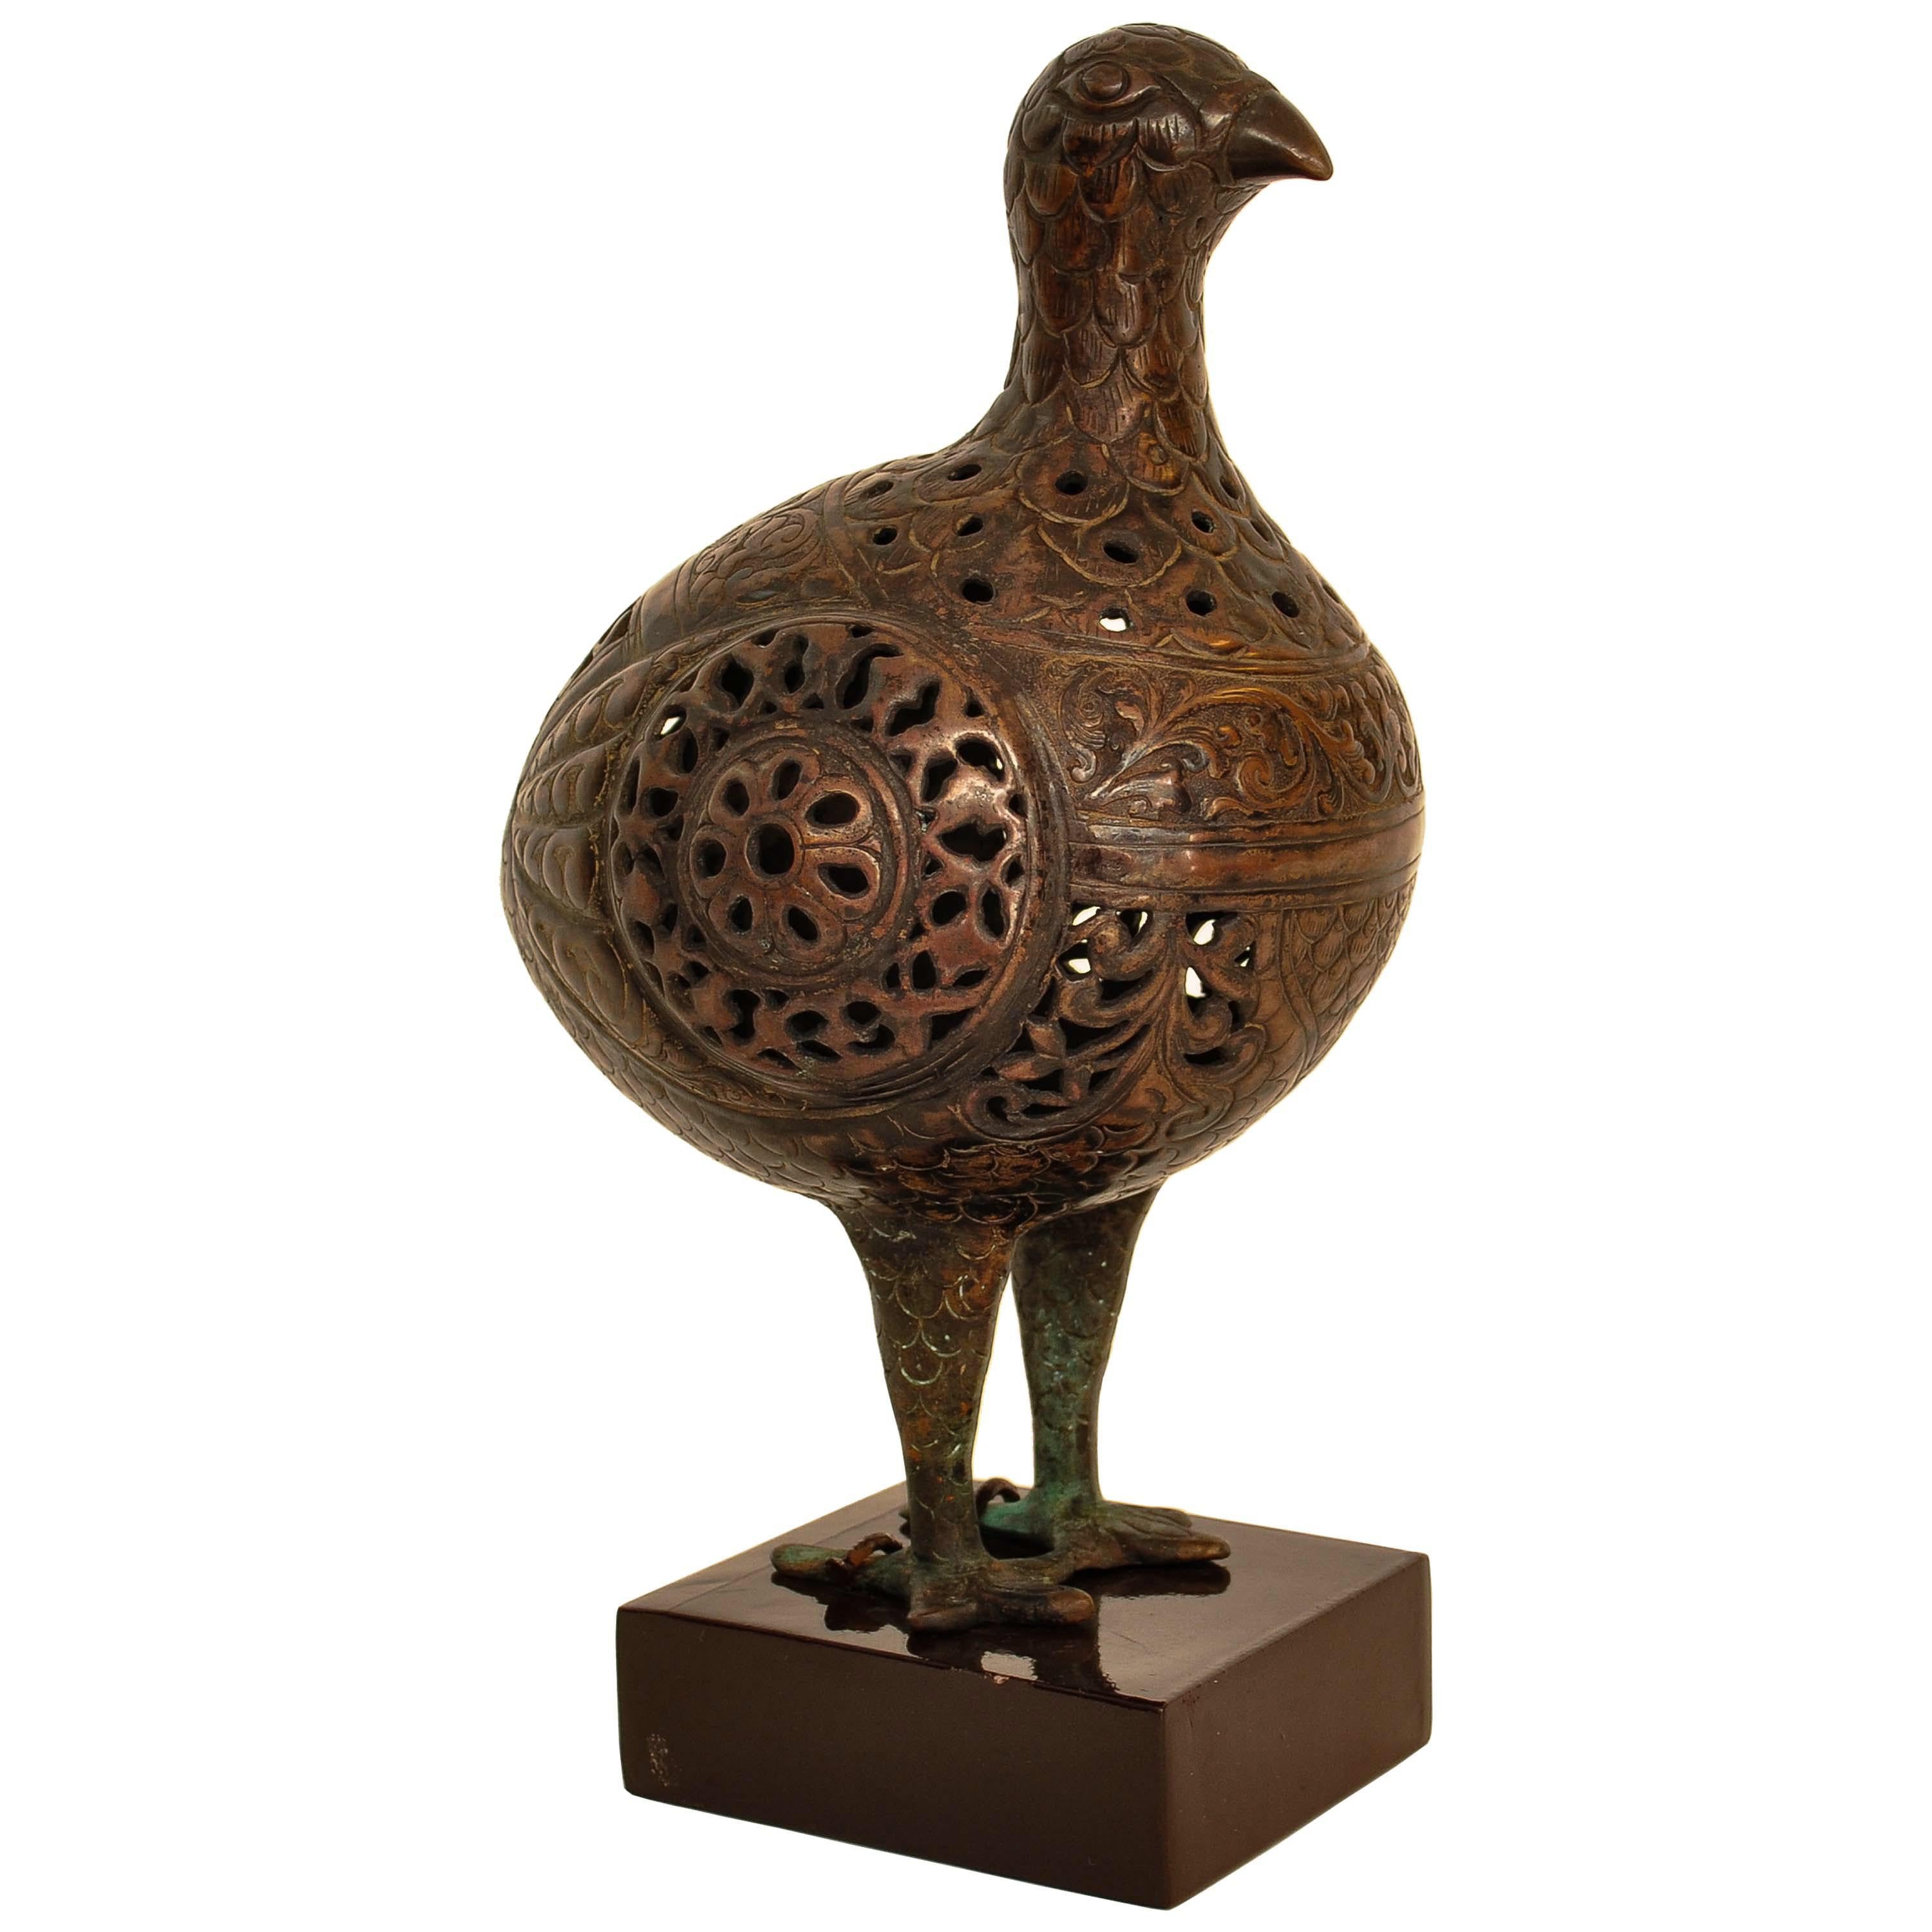 A fine and rare, ancient Islamic Seljuk period bronze bird statue, pomander, circa 1150, possibly Persia or Central Asia.
The bird is finely modeled and is engraved and has pierced work, such figures were used as pomanders or air freshners and were